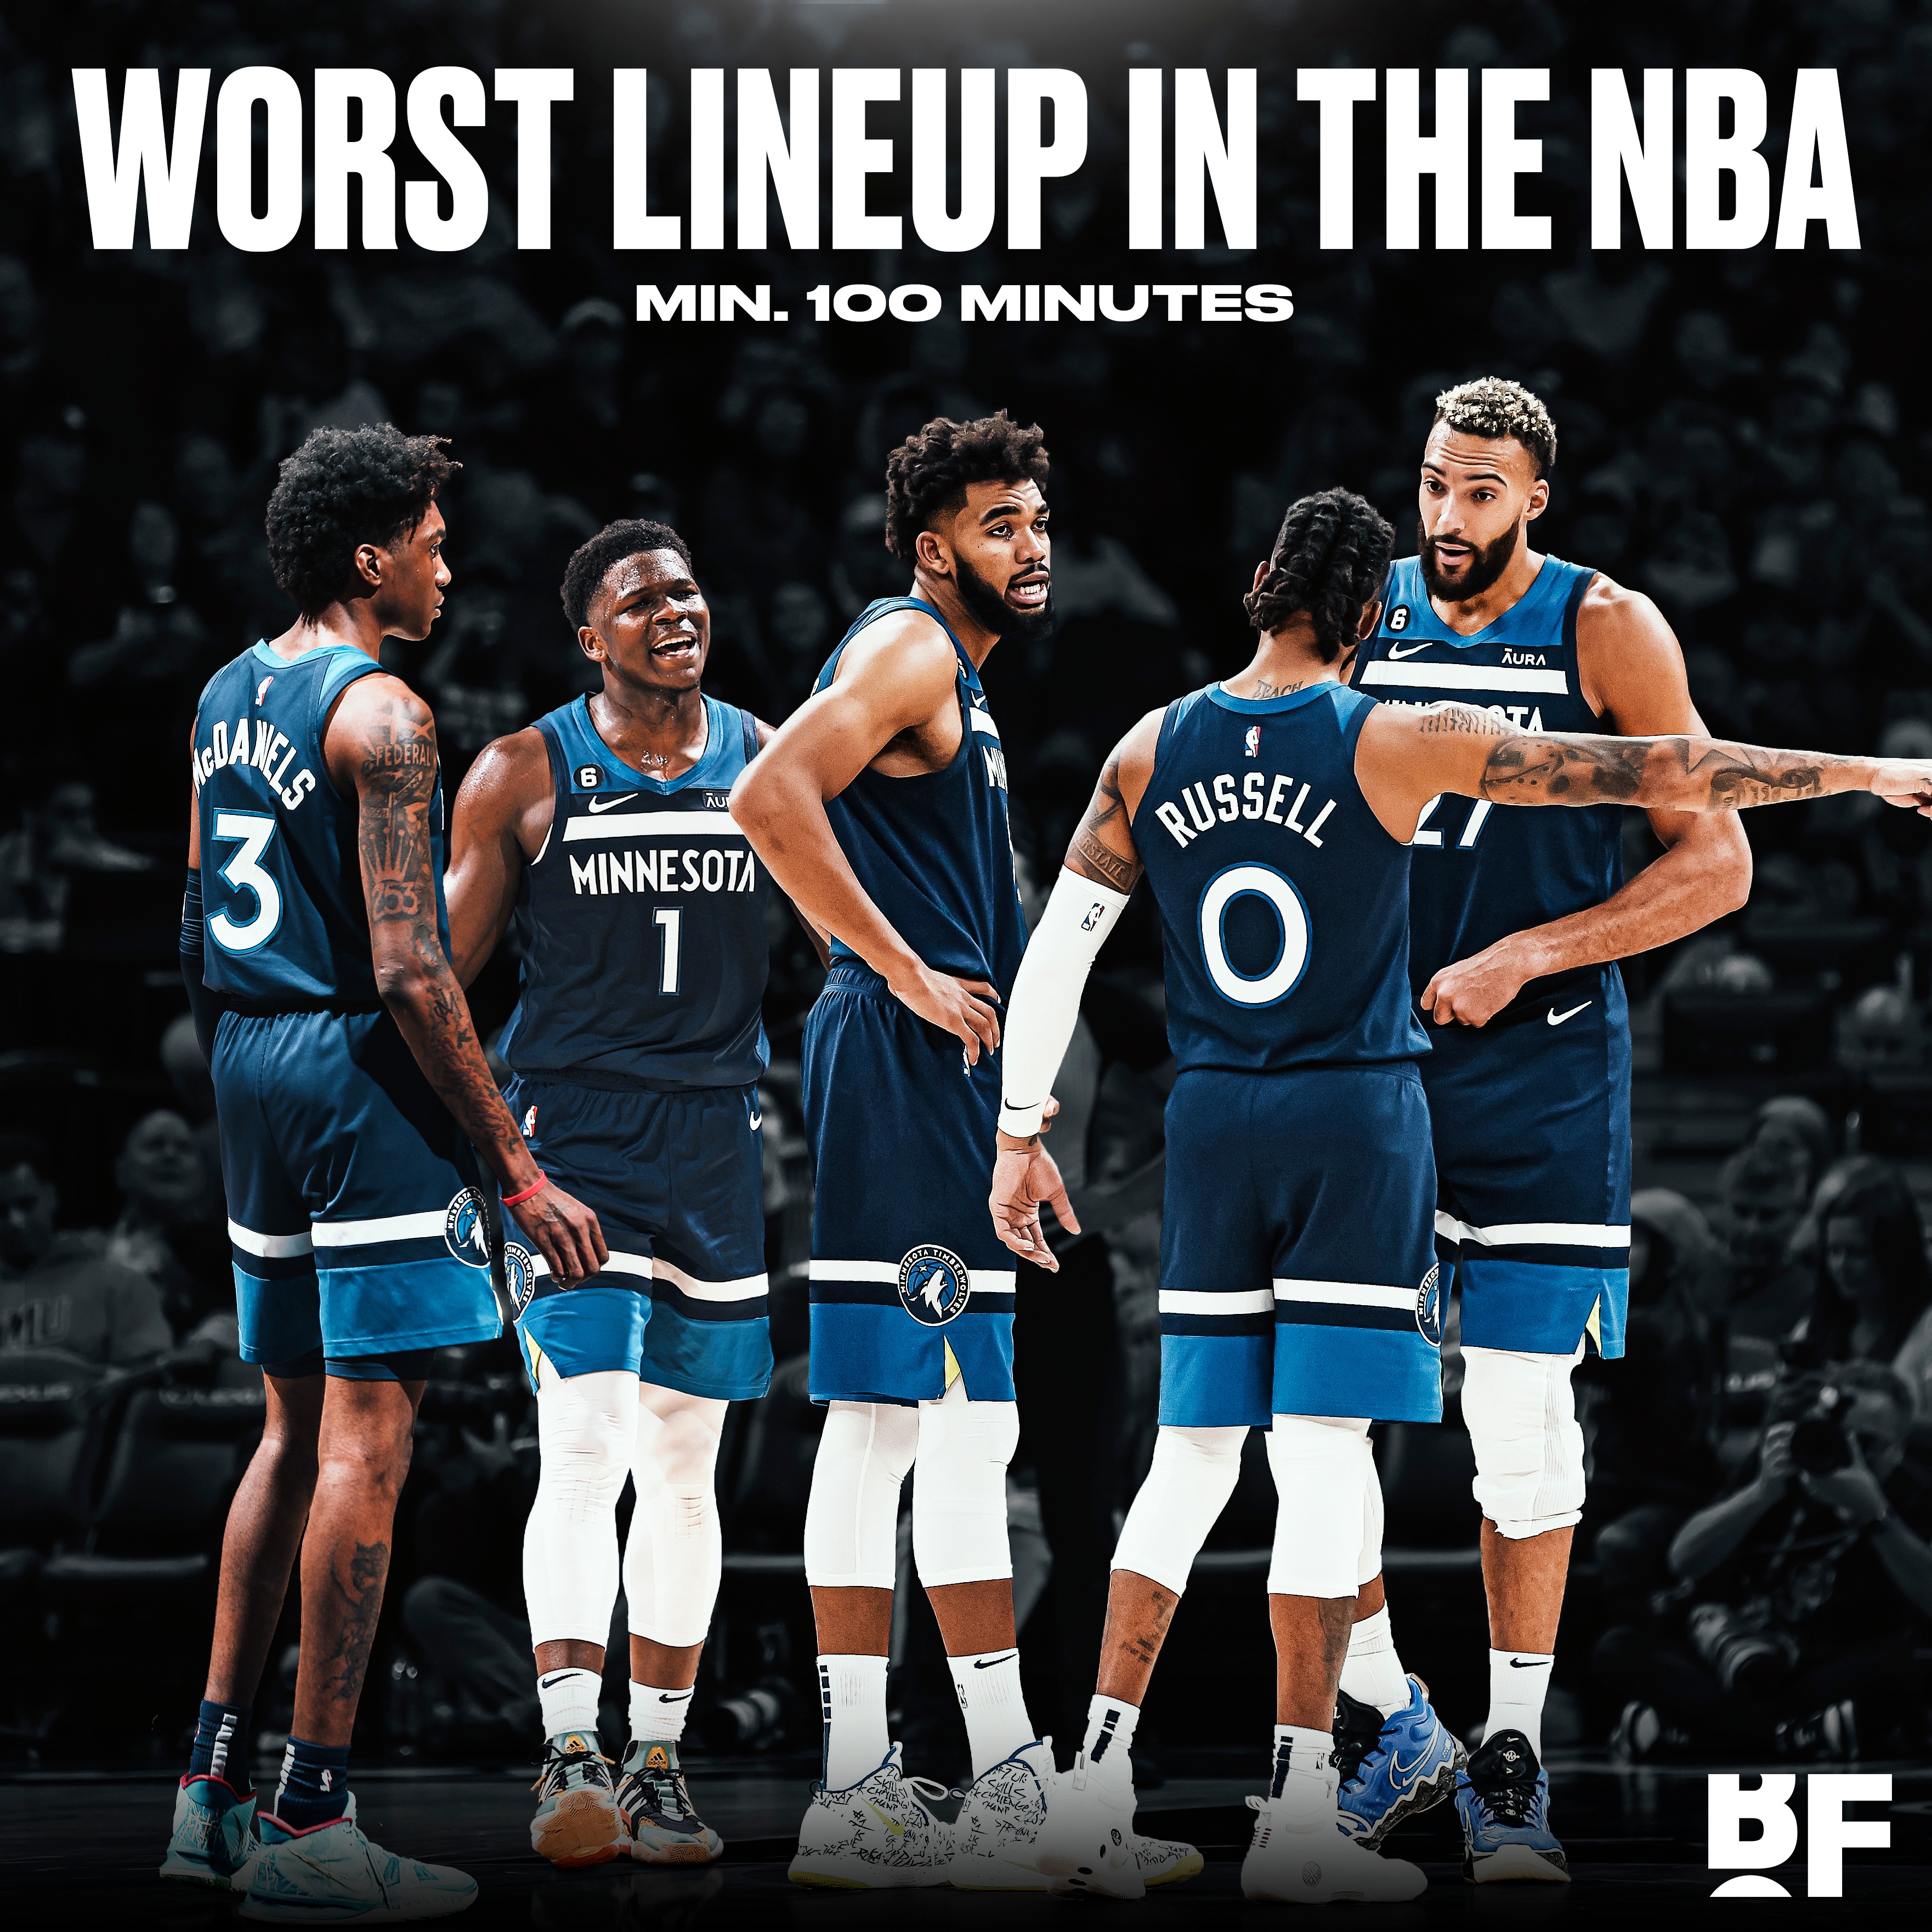 The Minnesota Timberwolves have - Basketball Forever